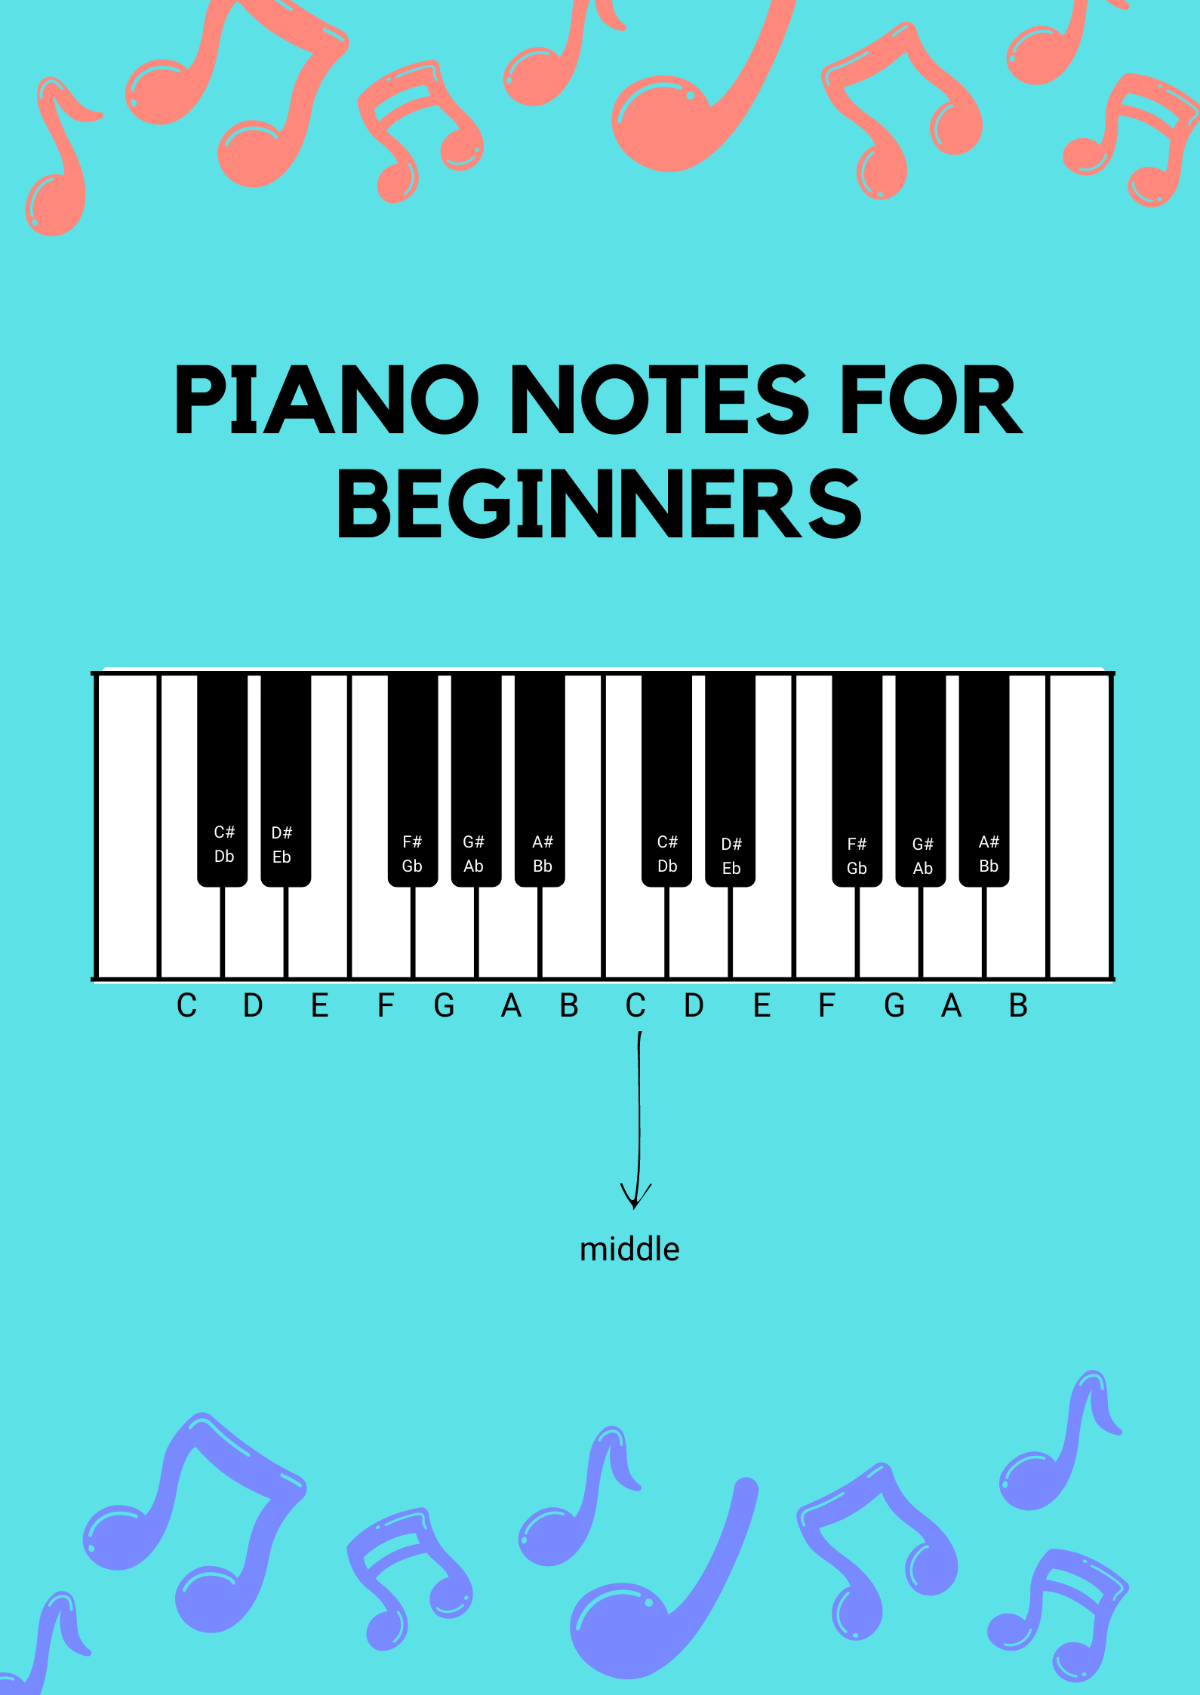 Minimal Piano Note Chart For Beginners Template